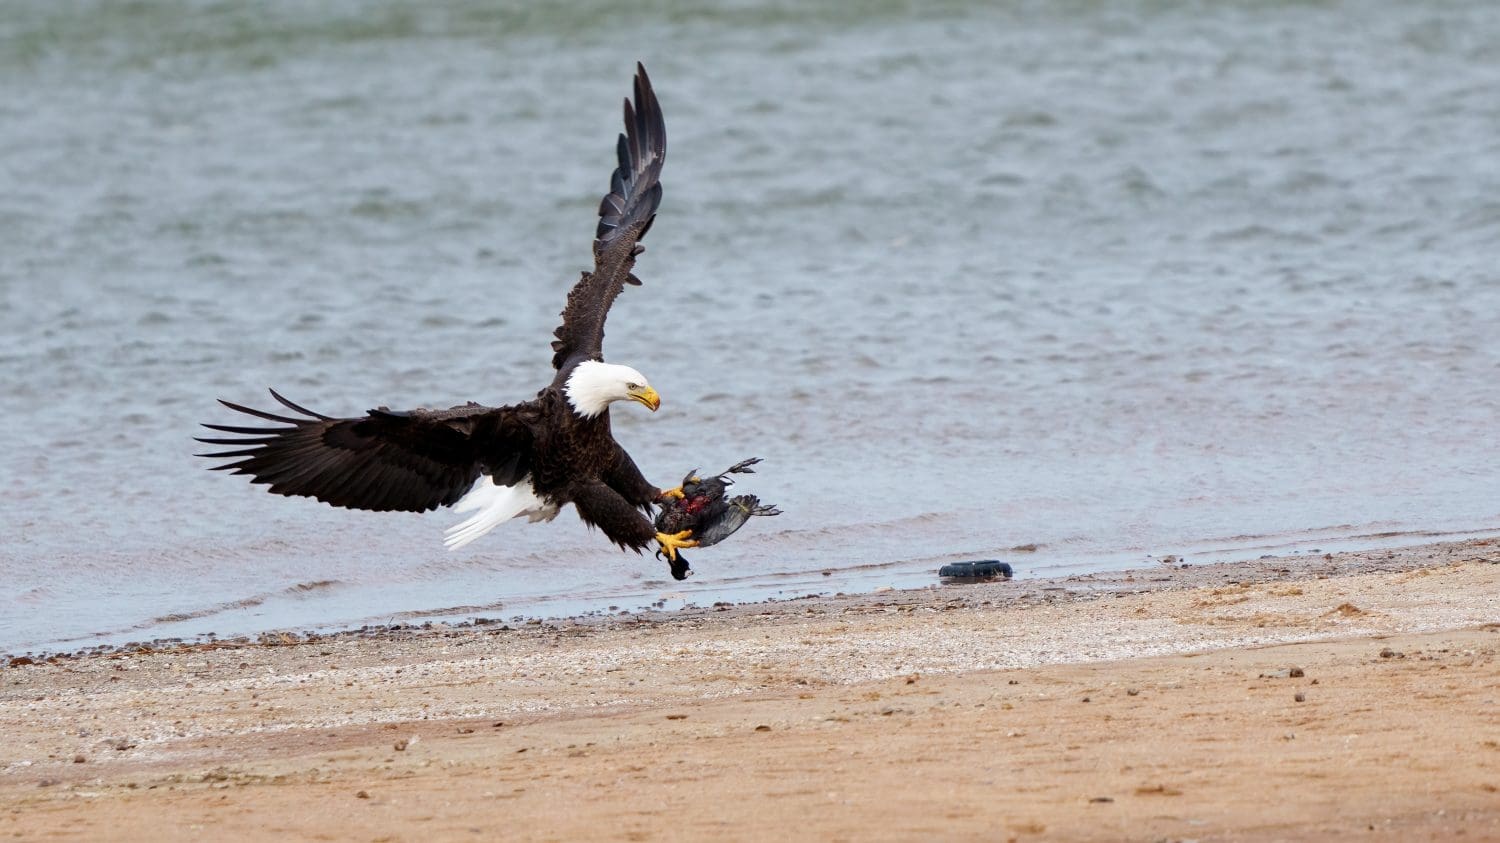 An Adult Bald Eagle Catches an American Coot at a Lake